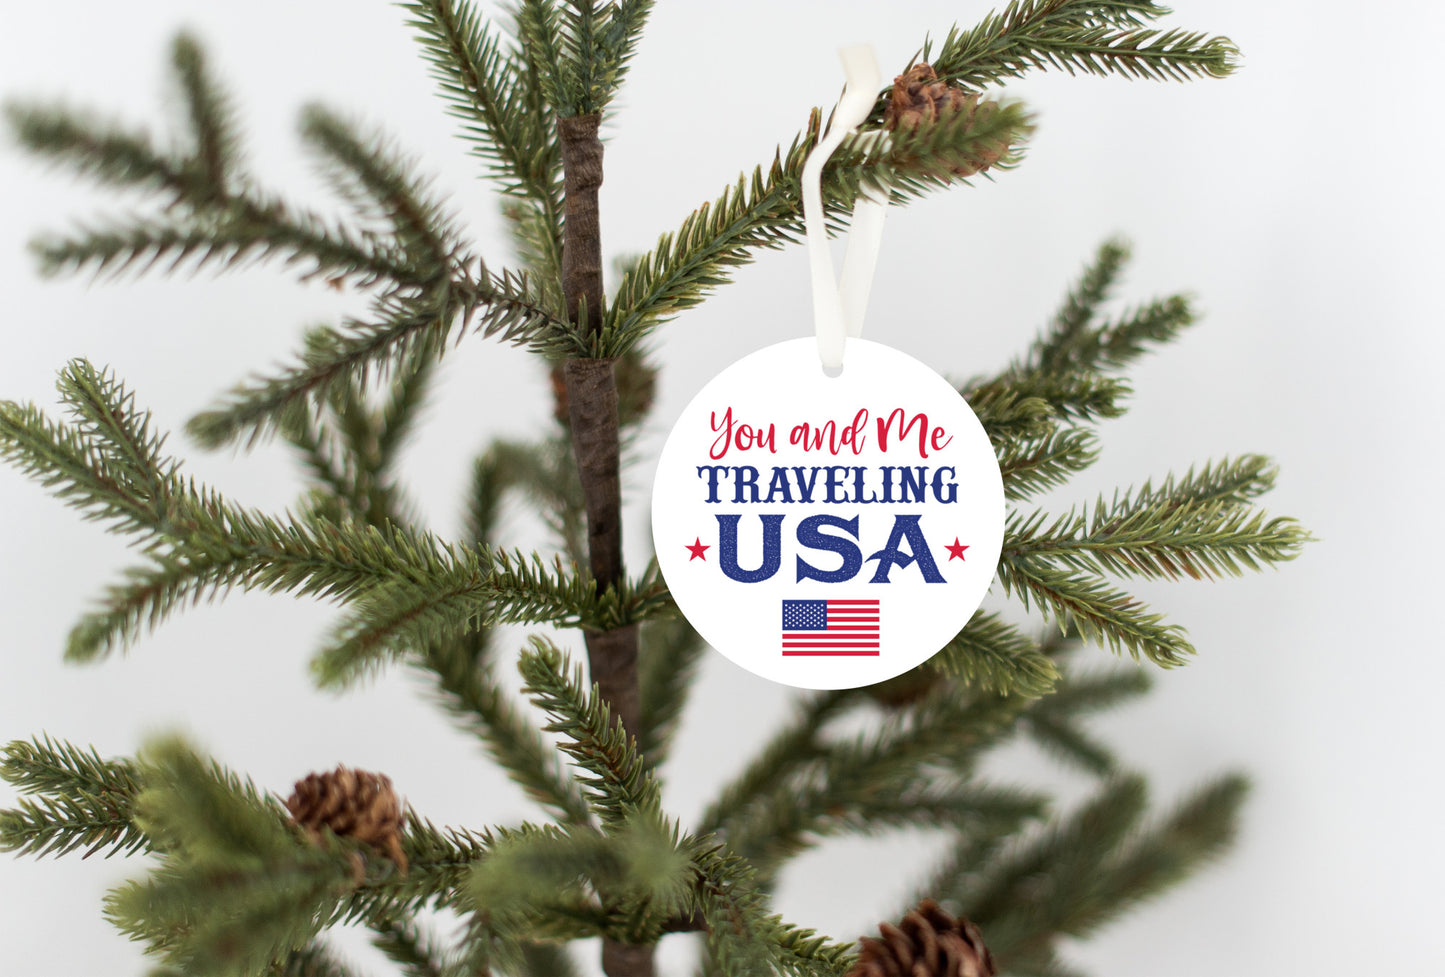 You and Me Traveling USA Ornament - Patriotic Colors